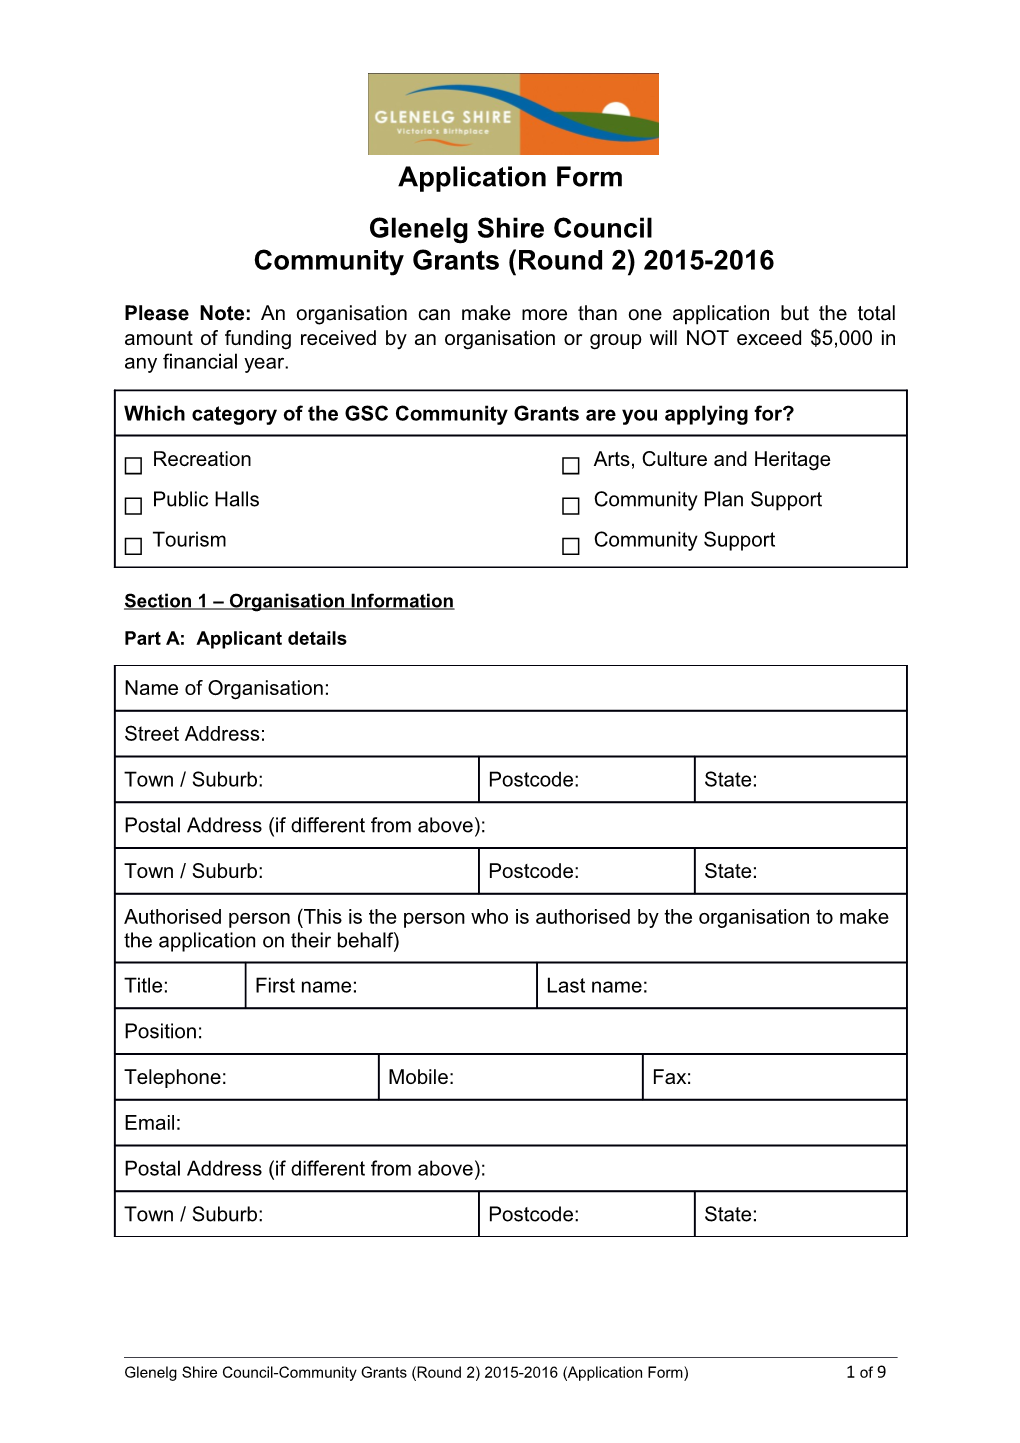 Application Form s50